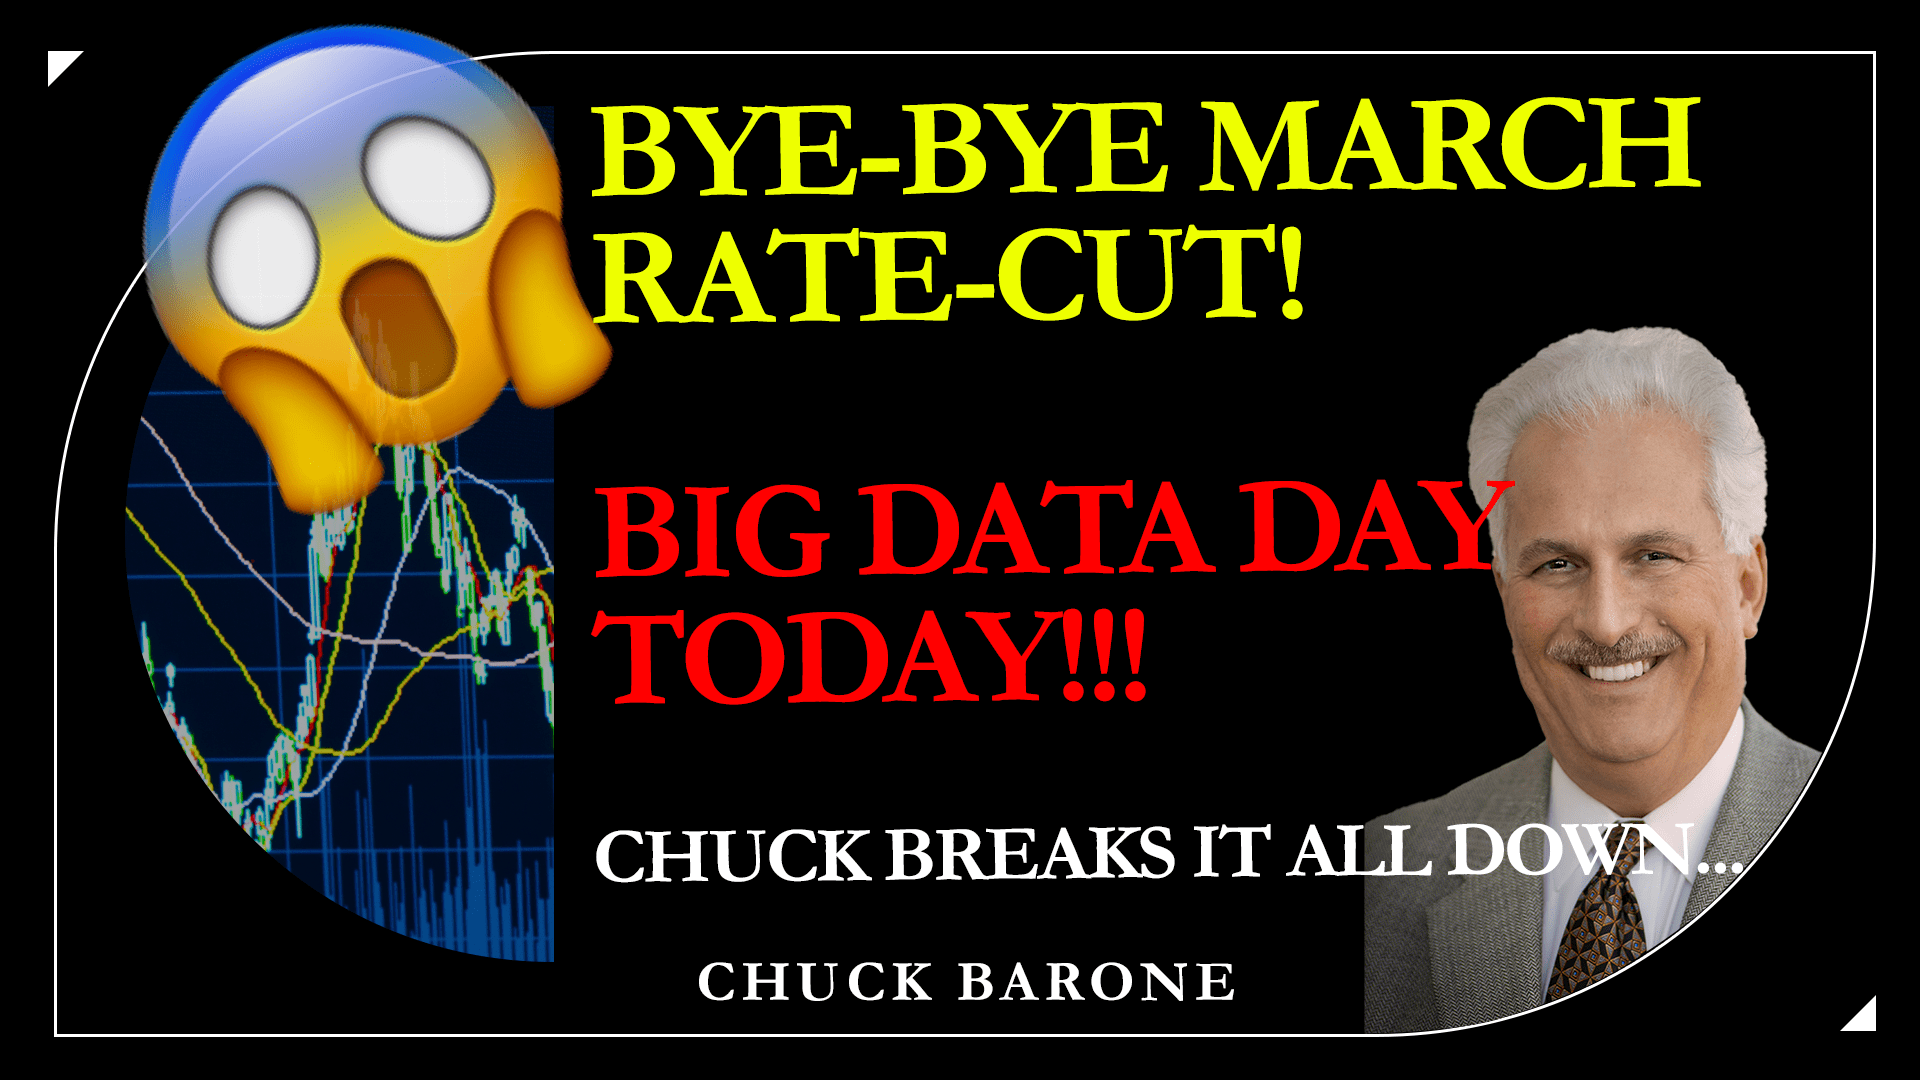 Featured image for “Bye-bye March RATE-CUT! BIG DATA day today!!! Chuck breaks it all down…”